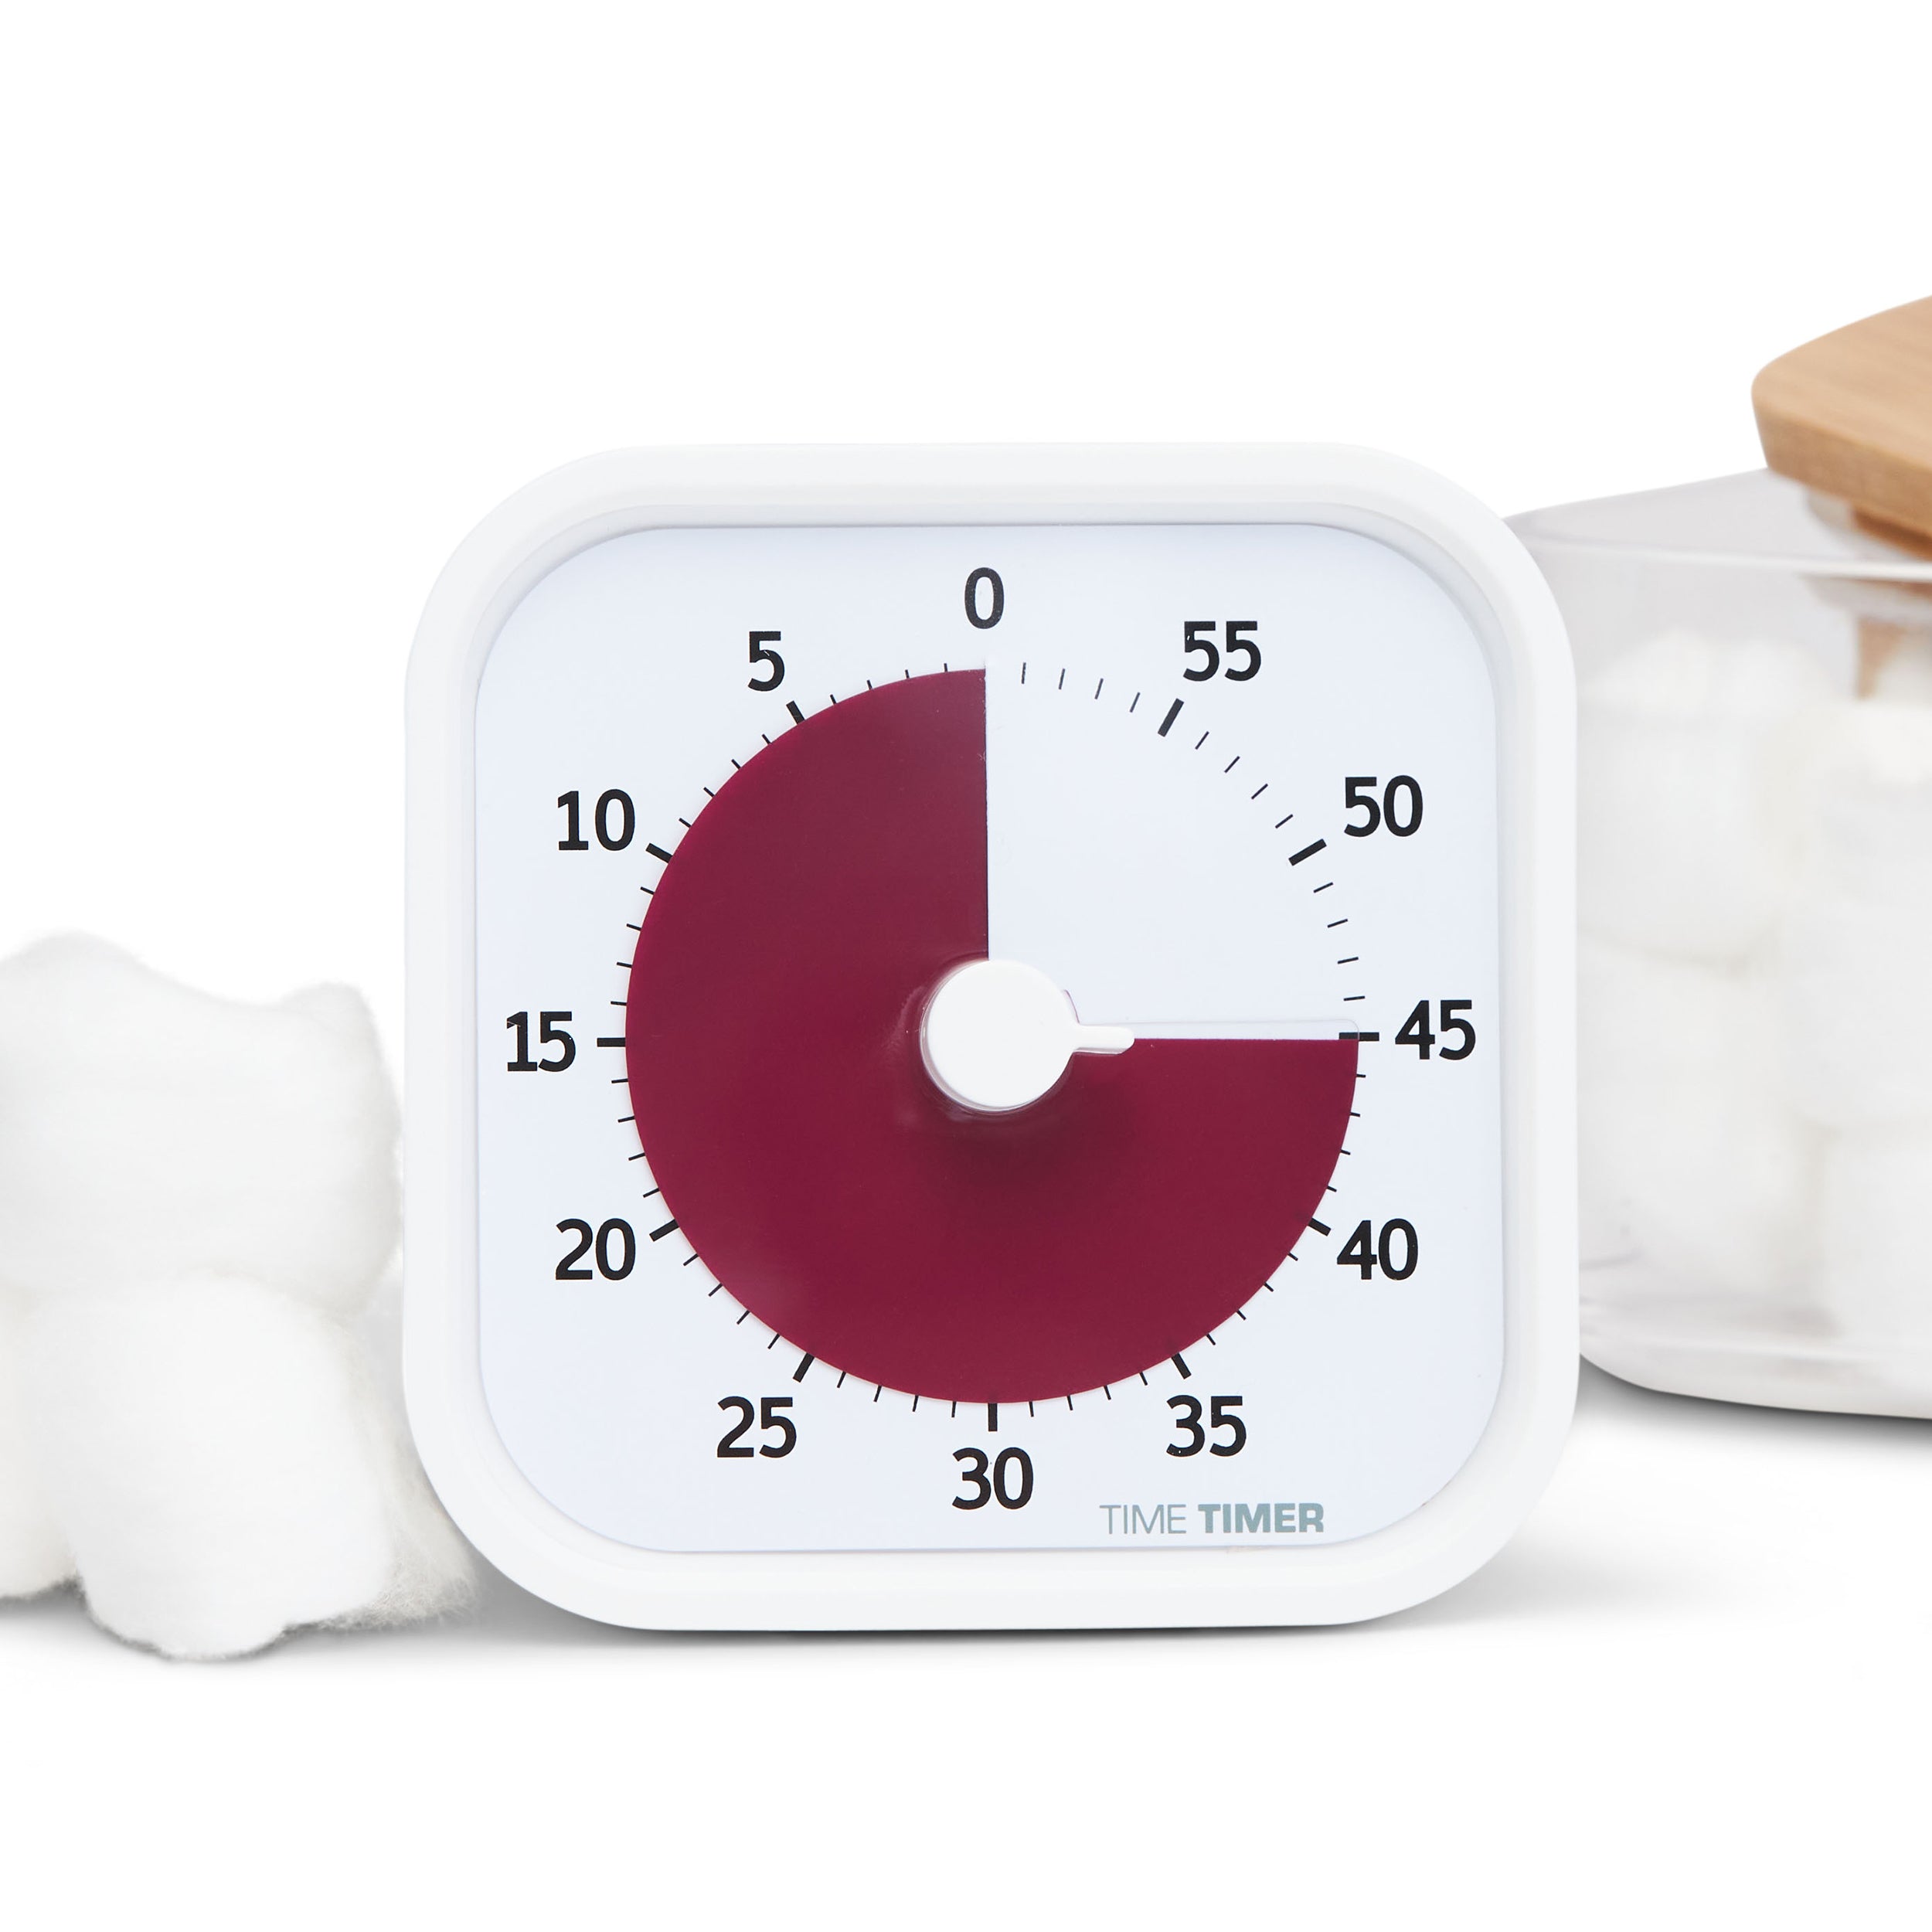 Time Timer MOD - Home Edition Visual Timer for kids and adults. This visual timer is a crisp white exterior with a burgundy disk. A very sophisticated look, pictured with fluffy white cotton balls surrounding it.  